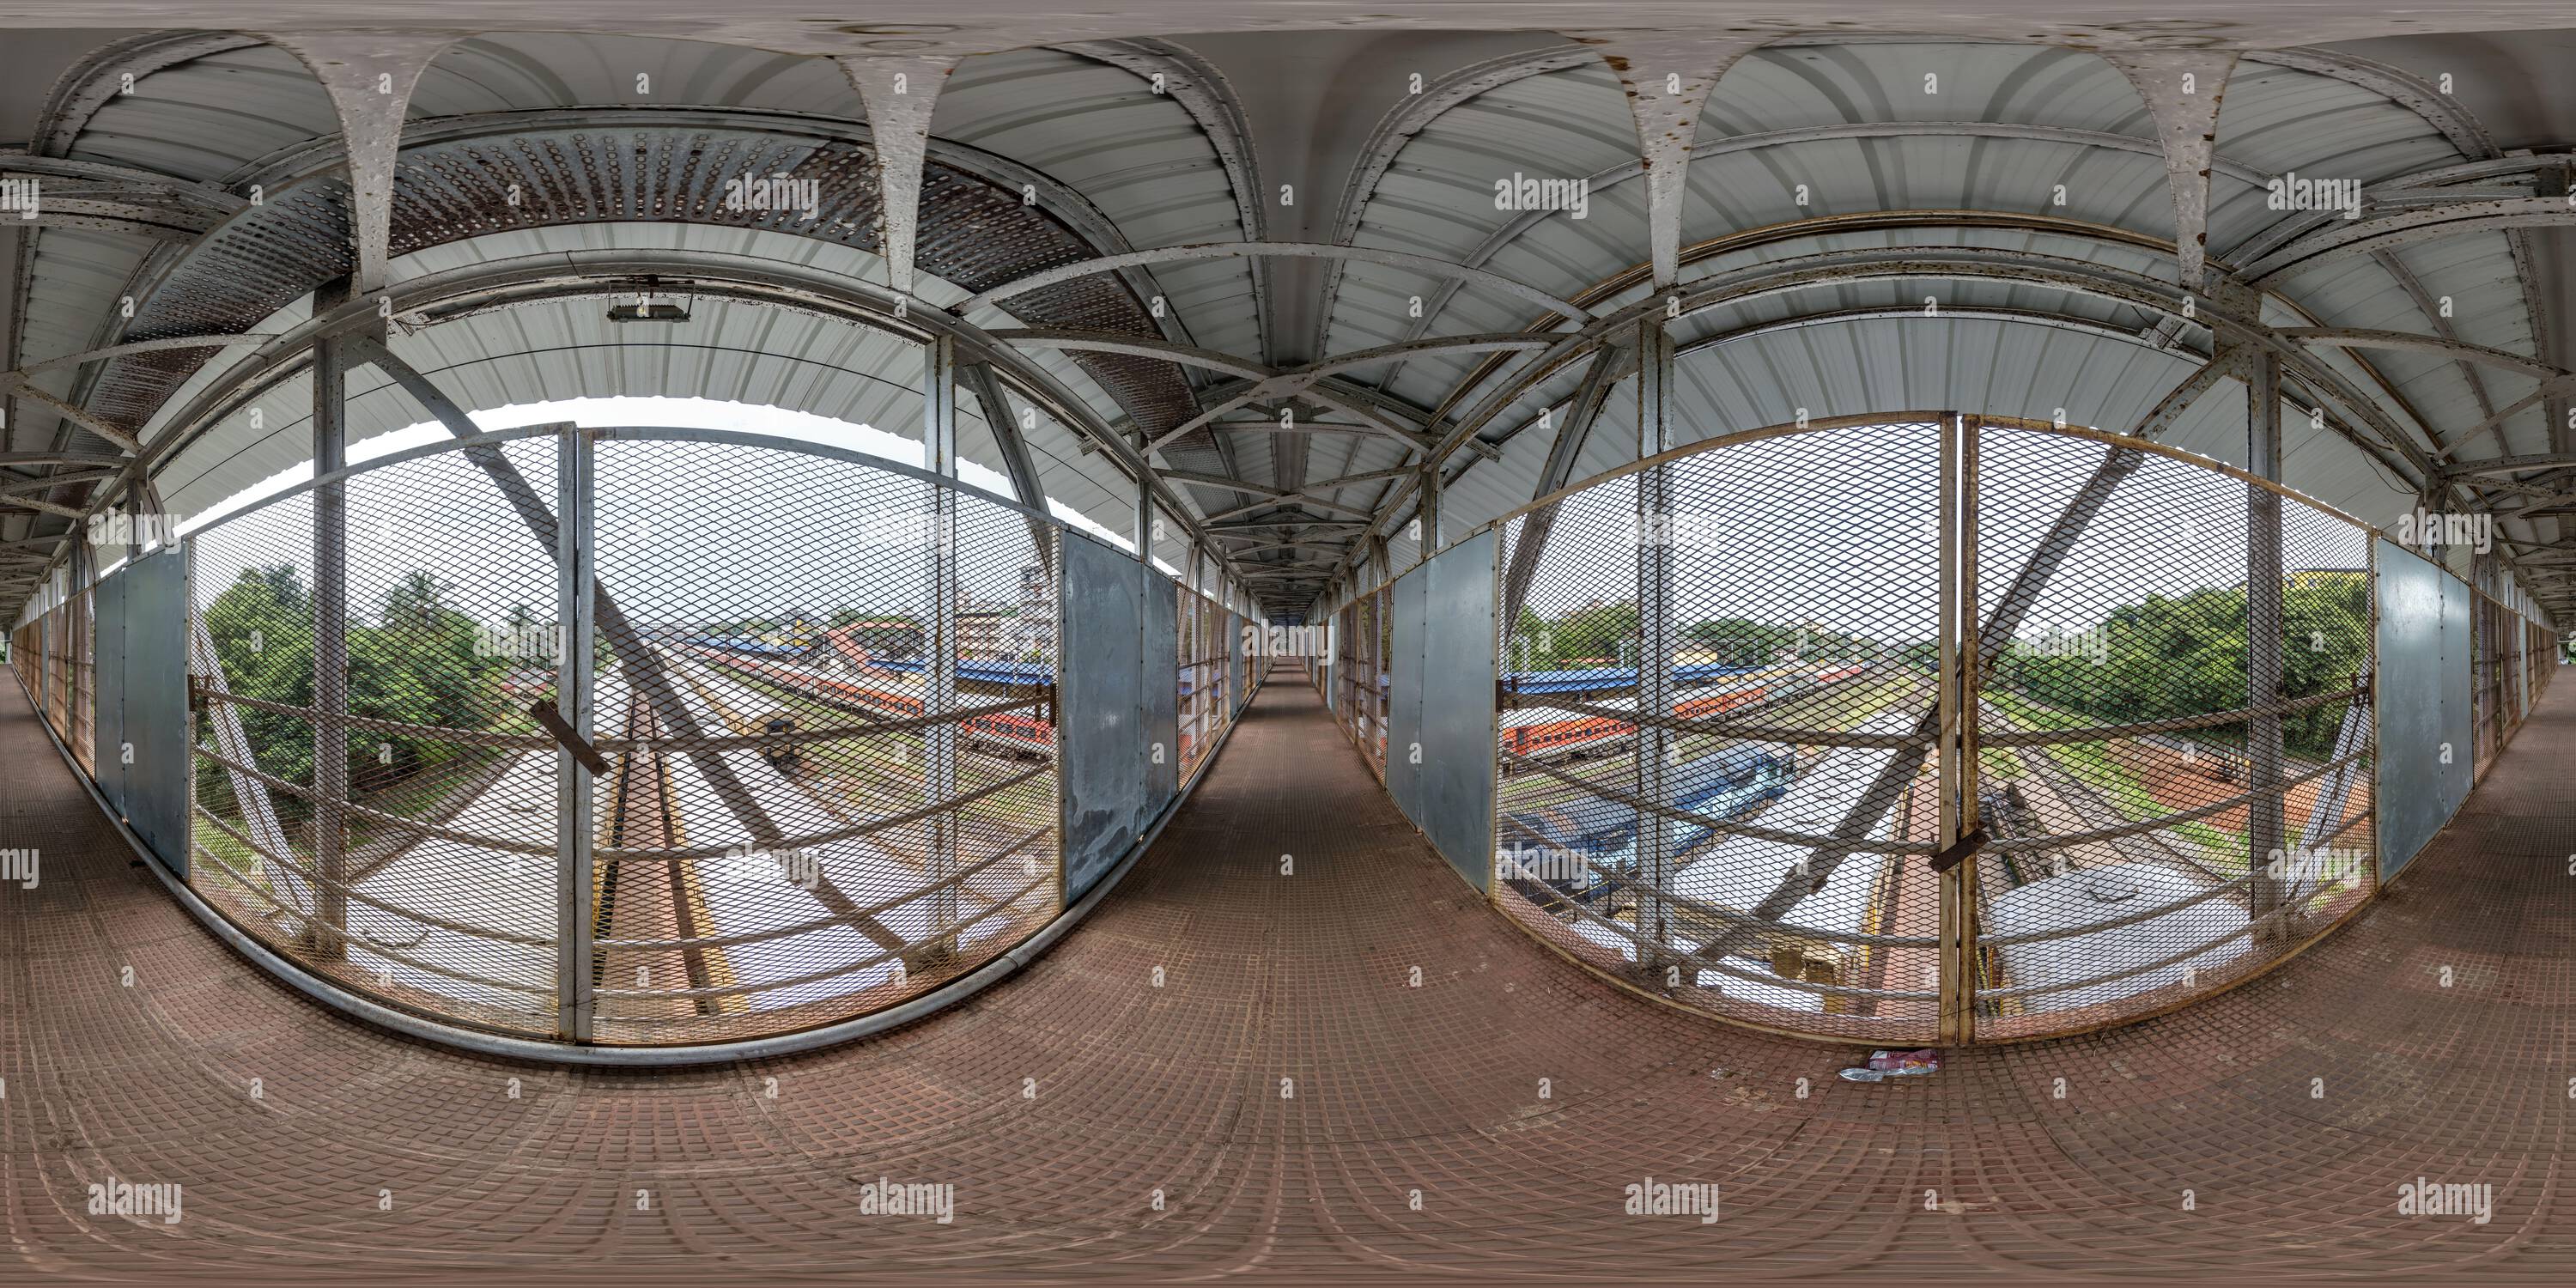 360 degree panoramic view of full seamless spherical 360 hdri panorama on iron steel frame construction of pedestrian crossing over the railway in equirectangular projection, read